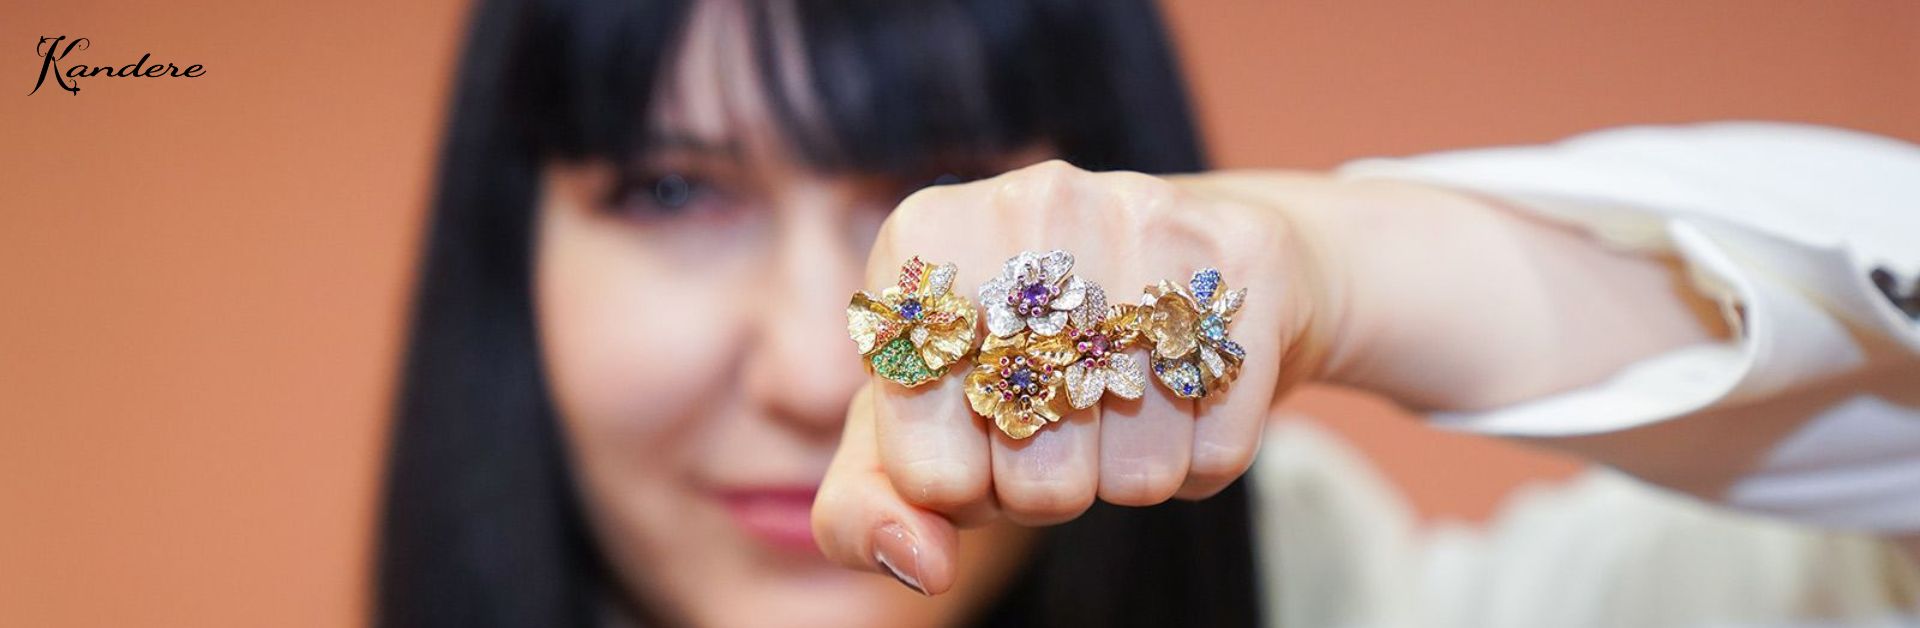 Top Jewelry trends to watch out for